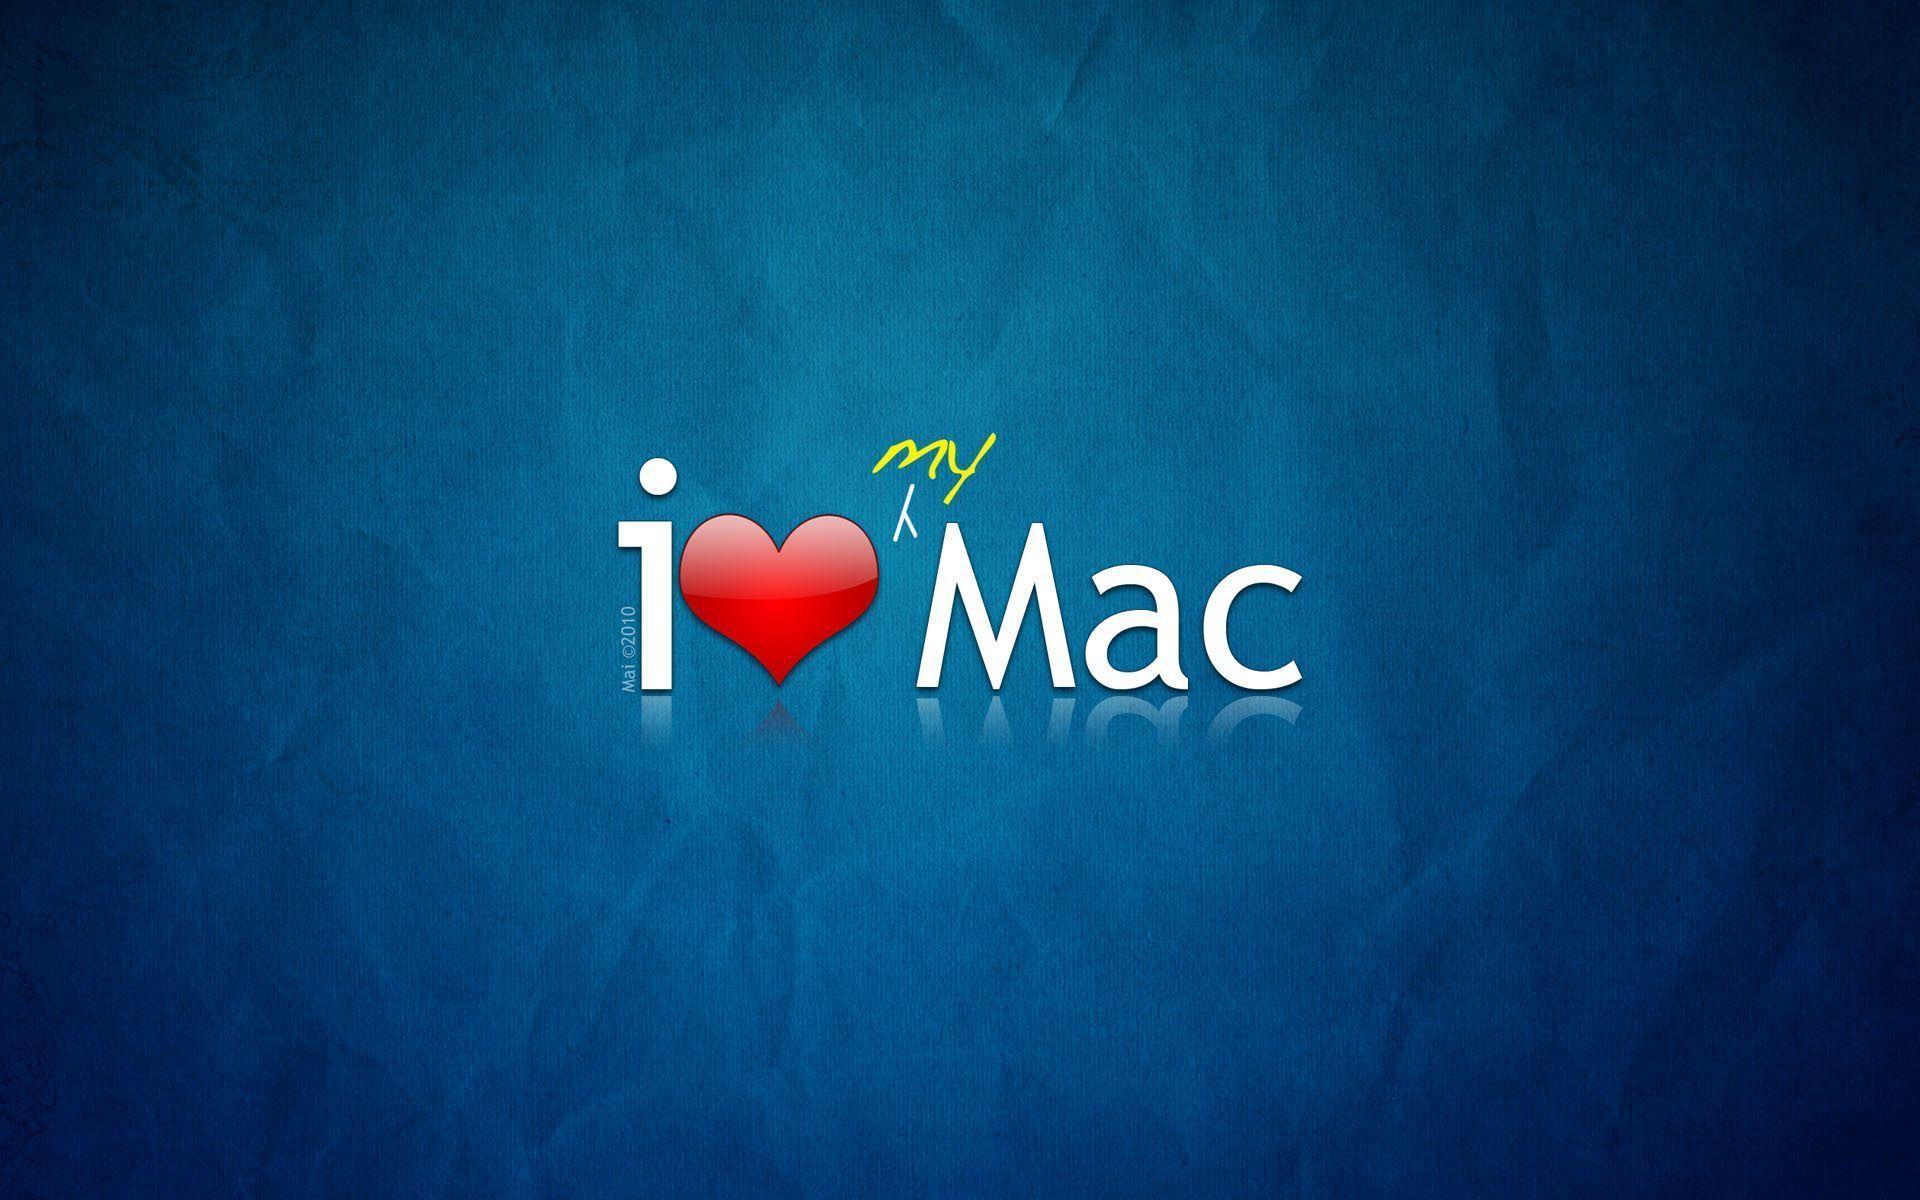 Apple mac Wallpaper and Background. High Quality PC Dekstop Full